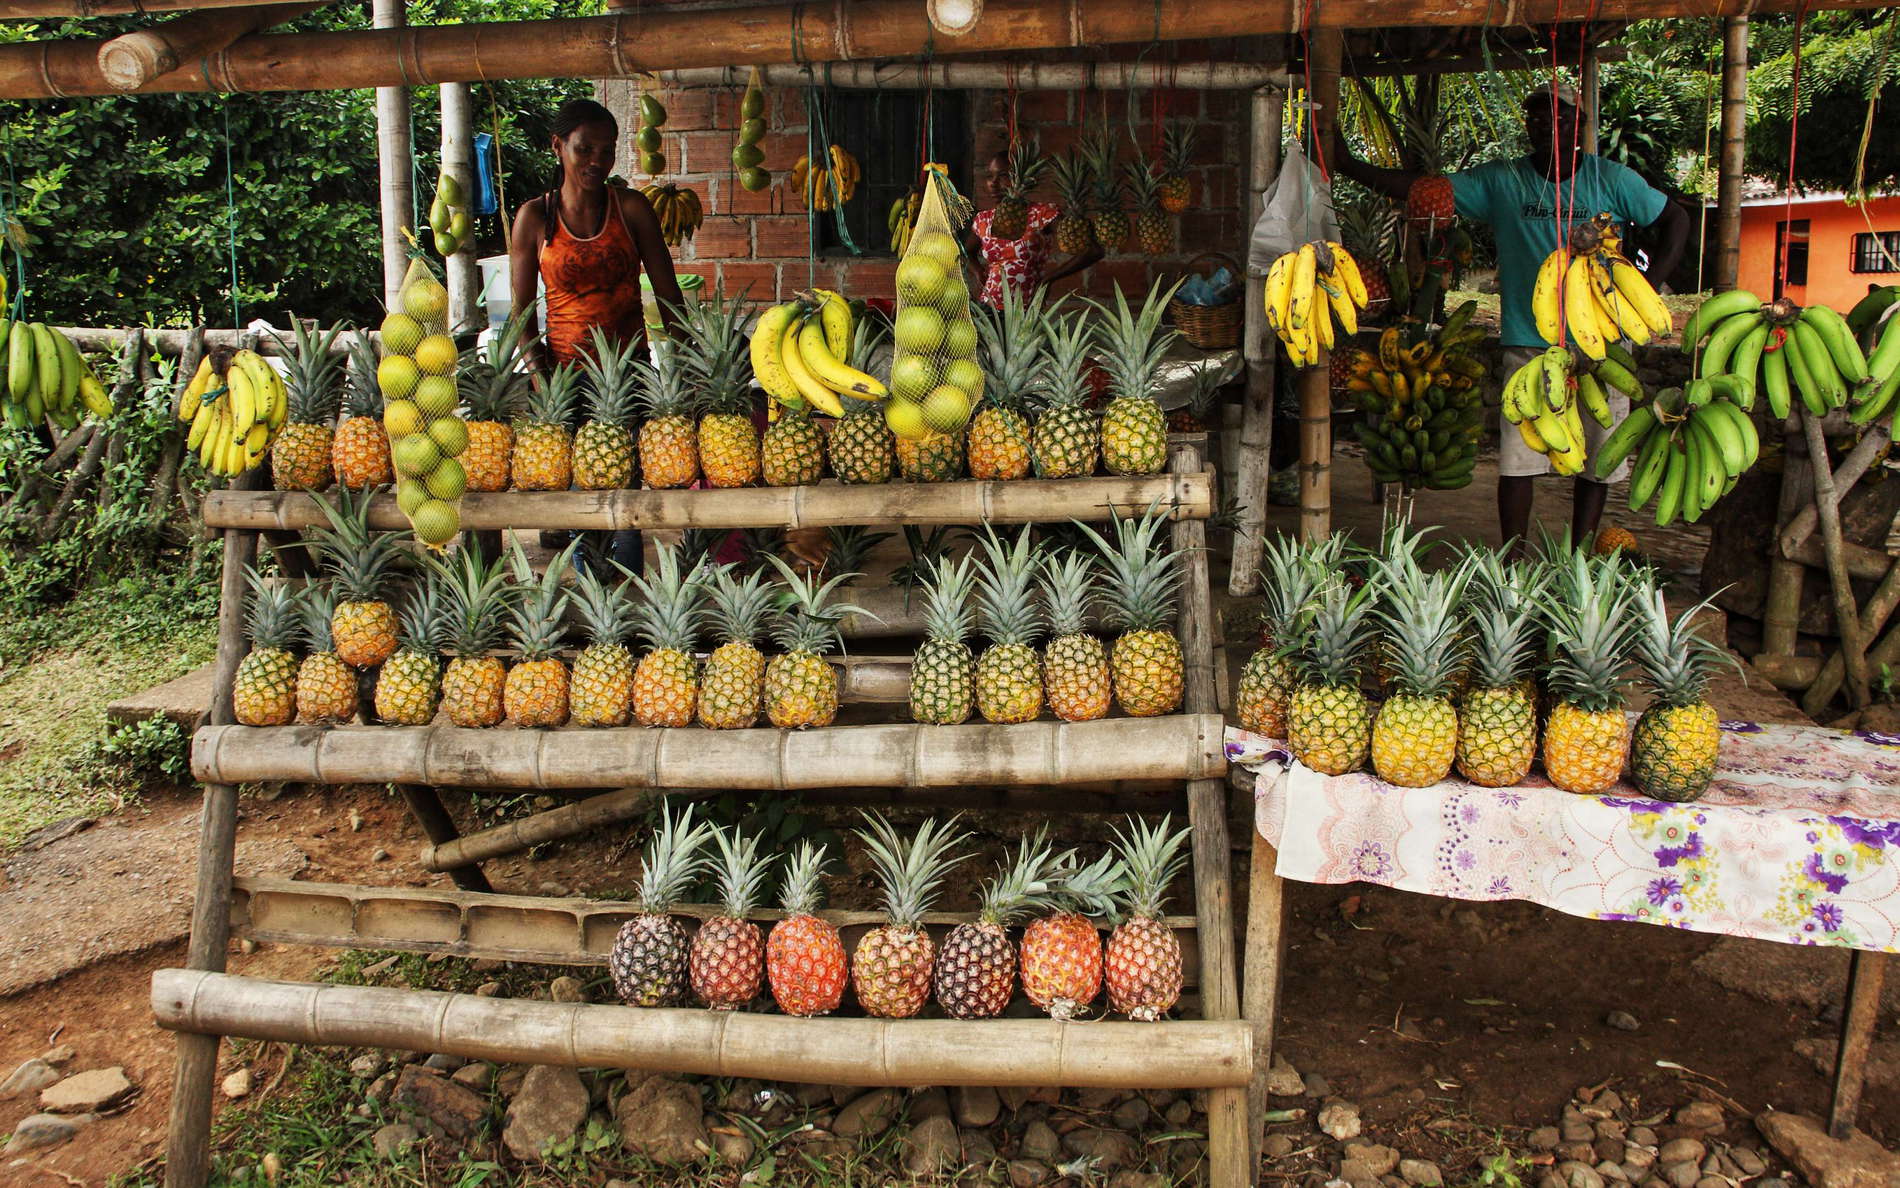 Cauca Valley  |  Tropical fruits